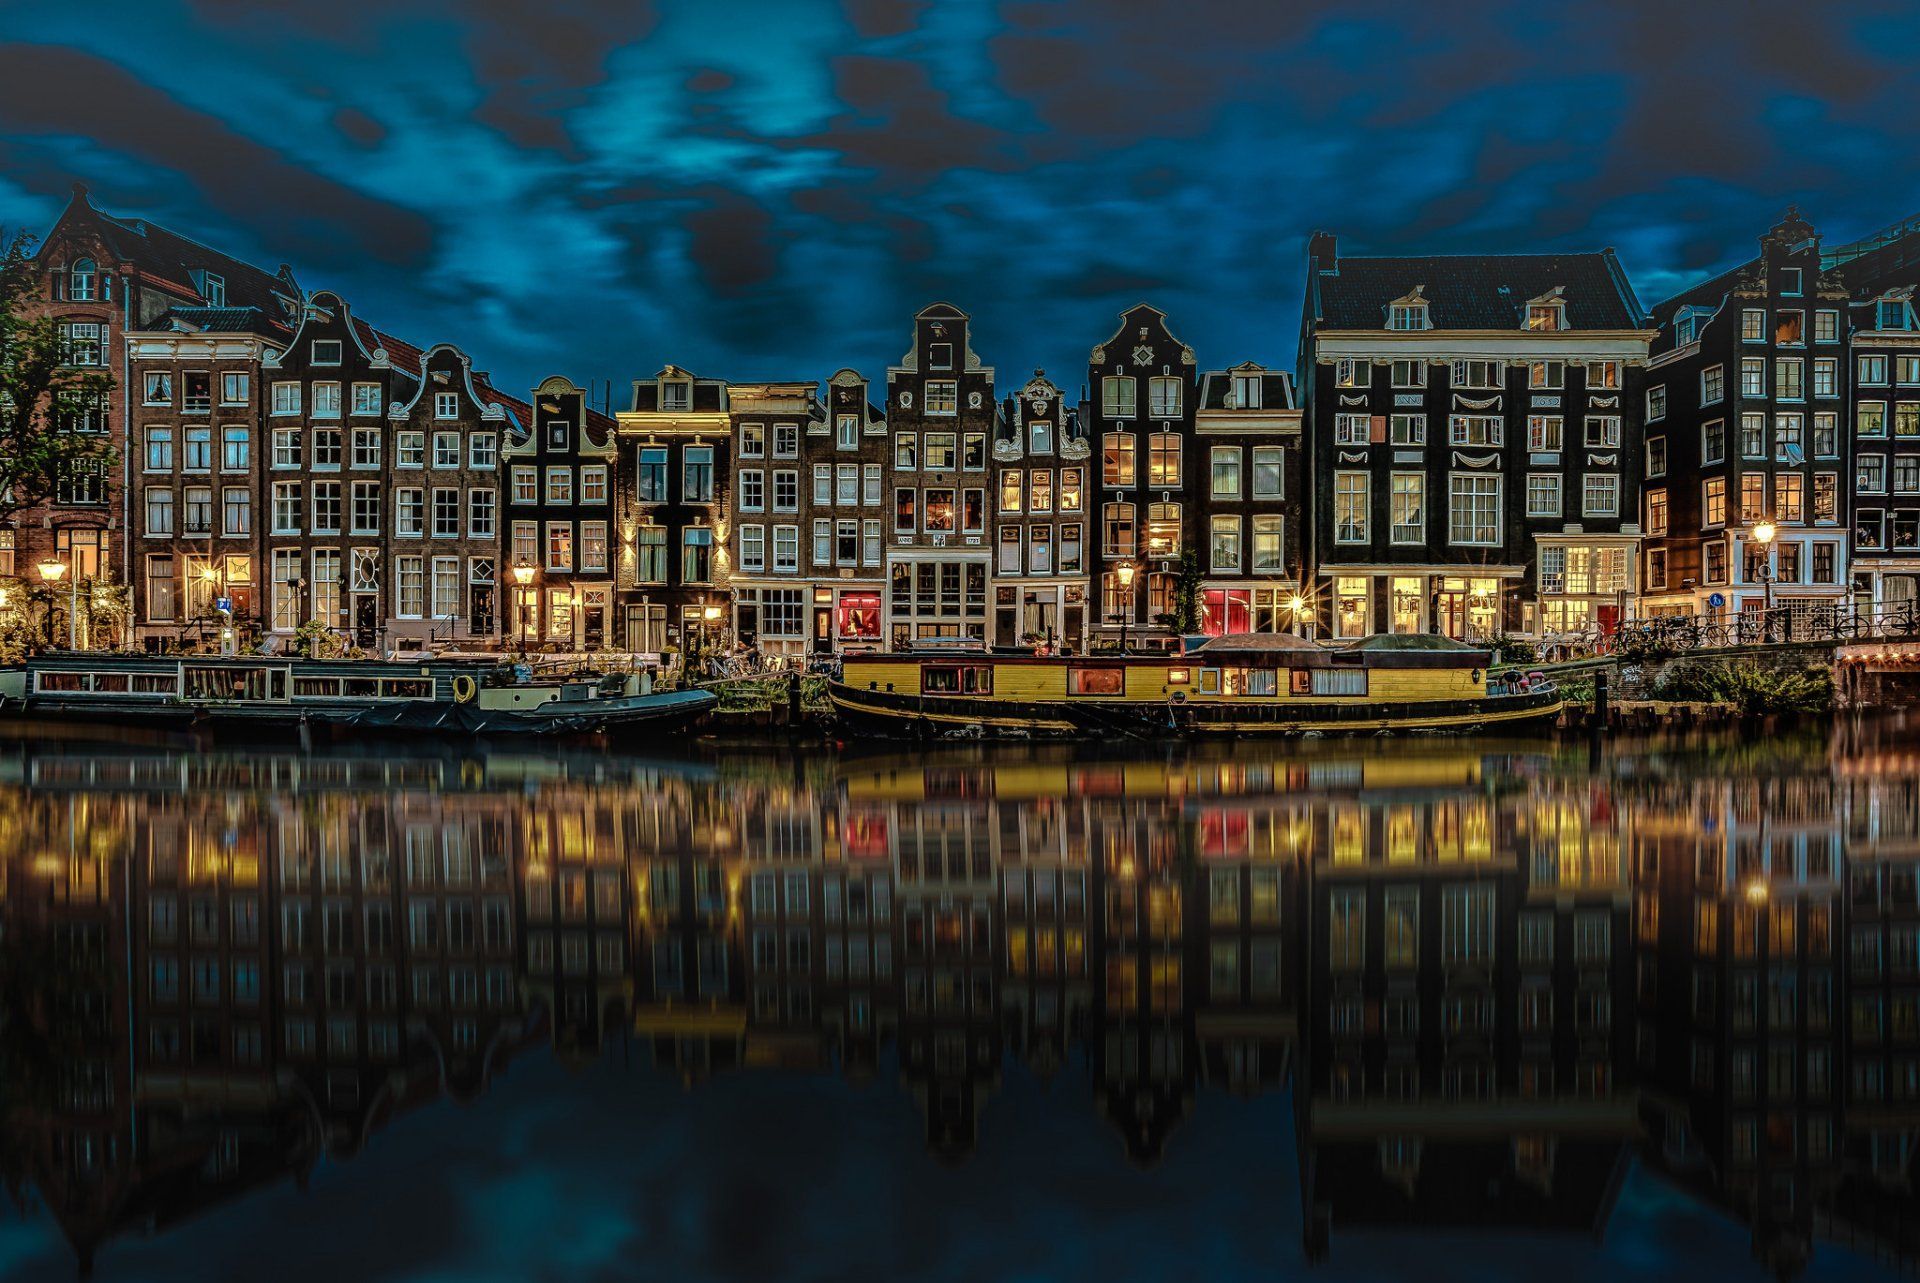 Man Made Amsterdam Reflection Night Canal House Building Wallpaper. Amsterdam wallpaper, Netherlands, Amsterdam canals